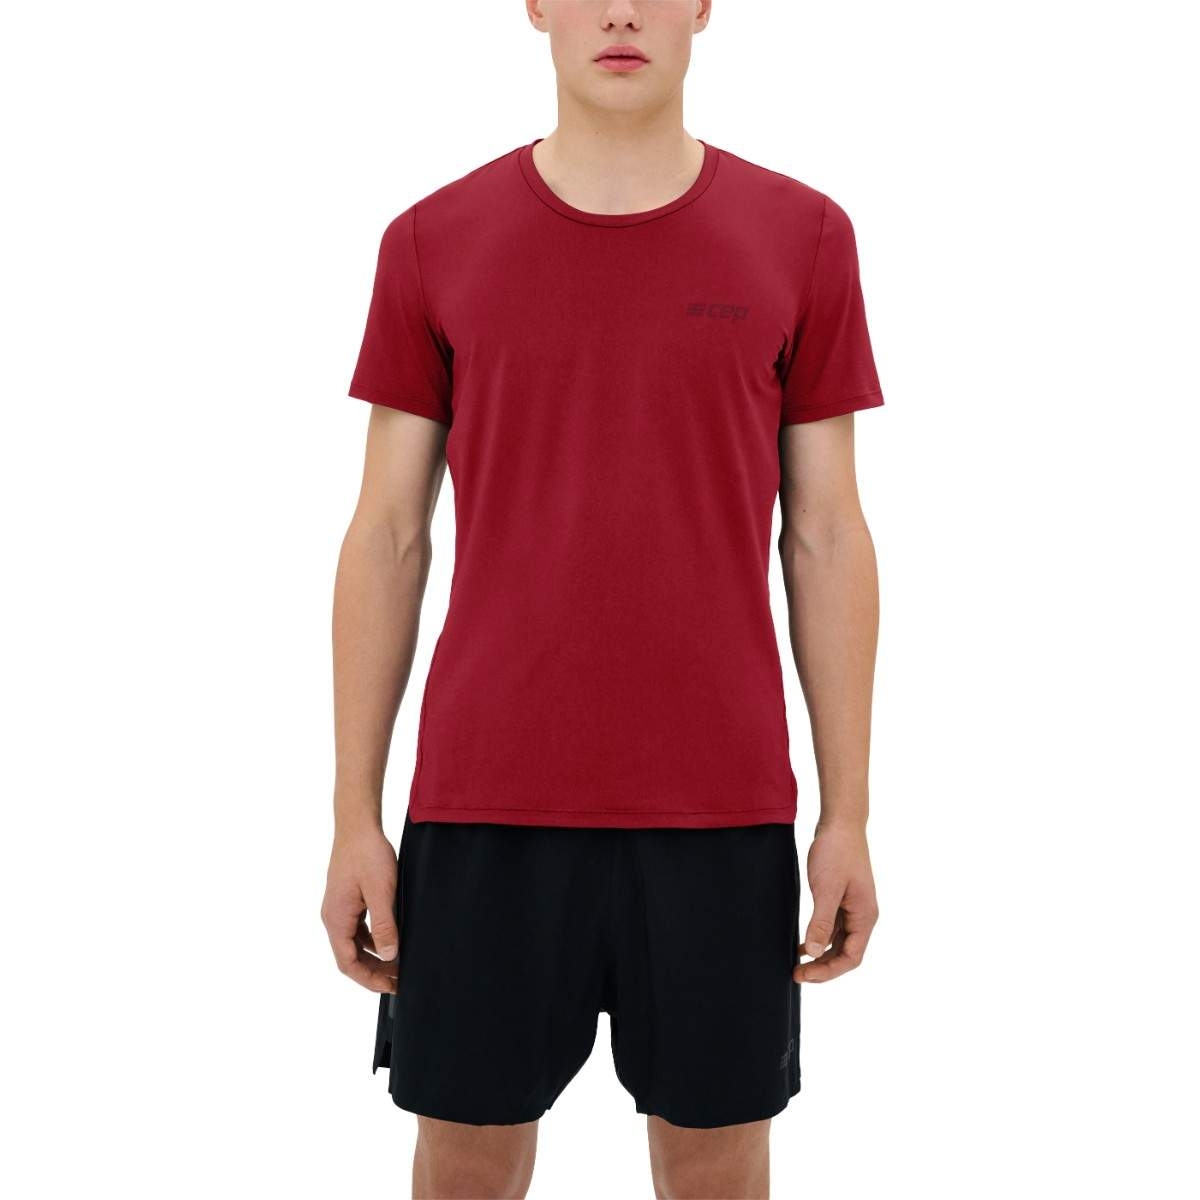 Picture of CEP The Run Round Neck T-Shirt V5 Men - dark red